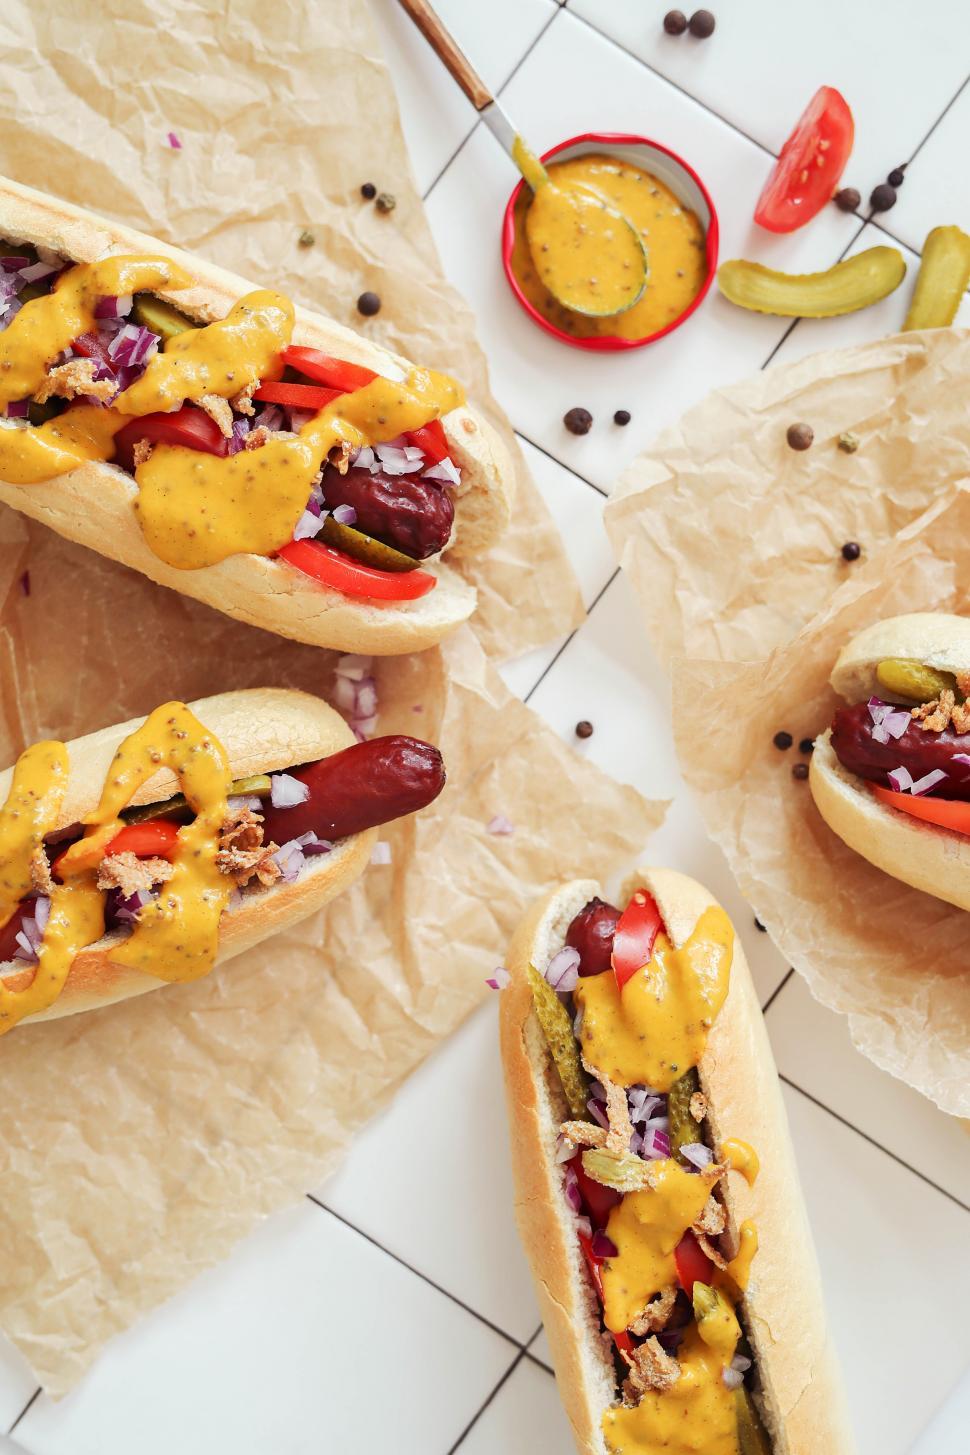 Free Image of Hot dogs with toppings 